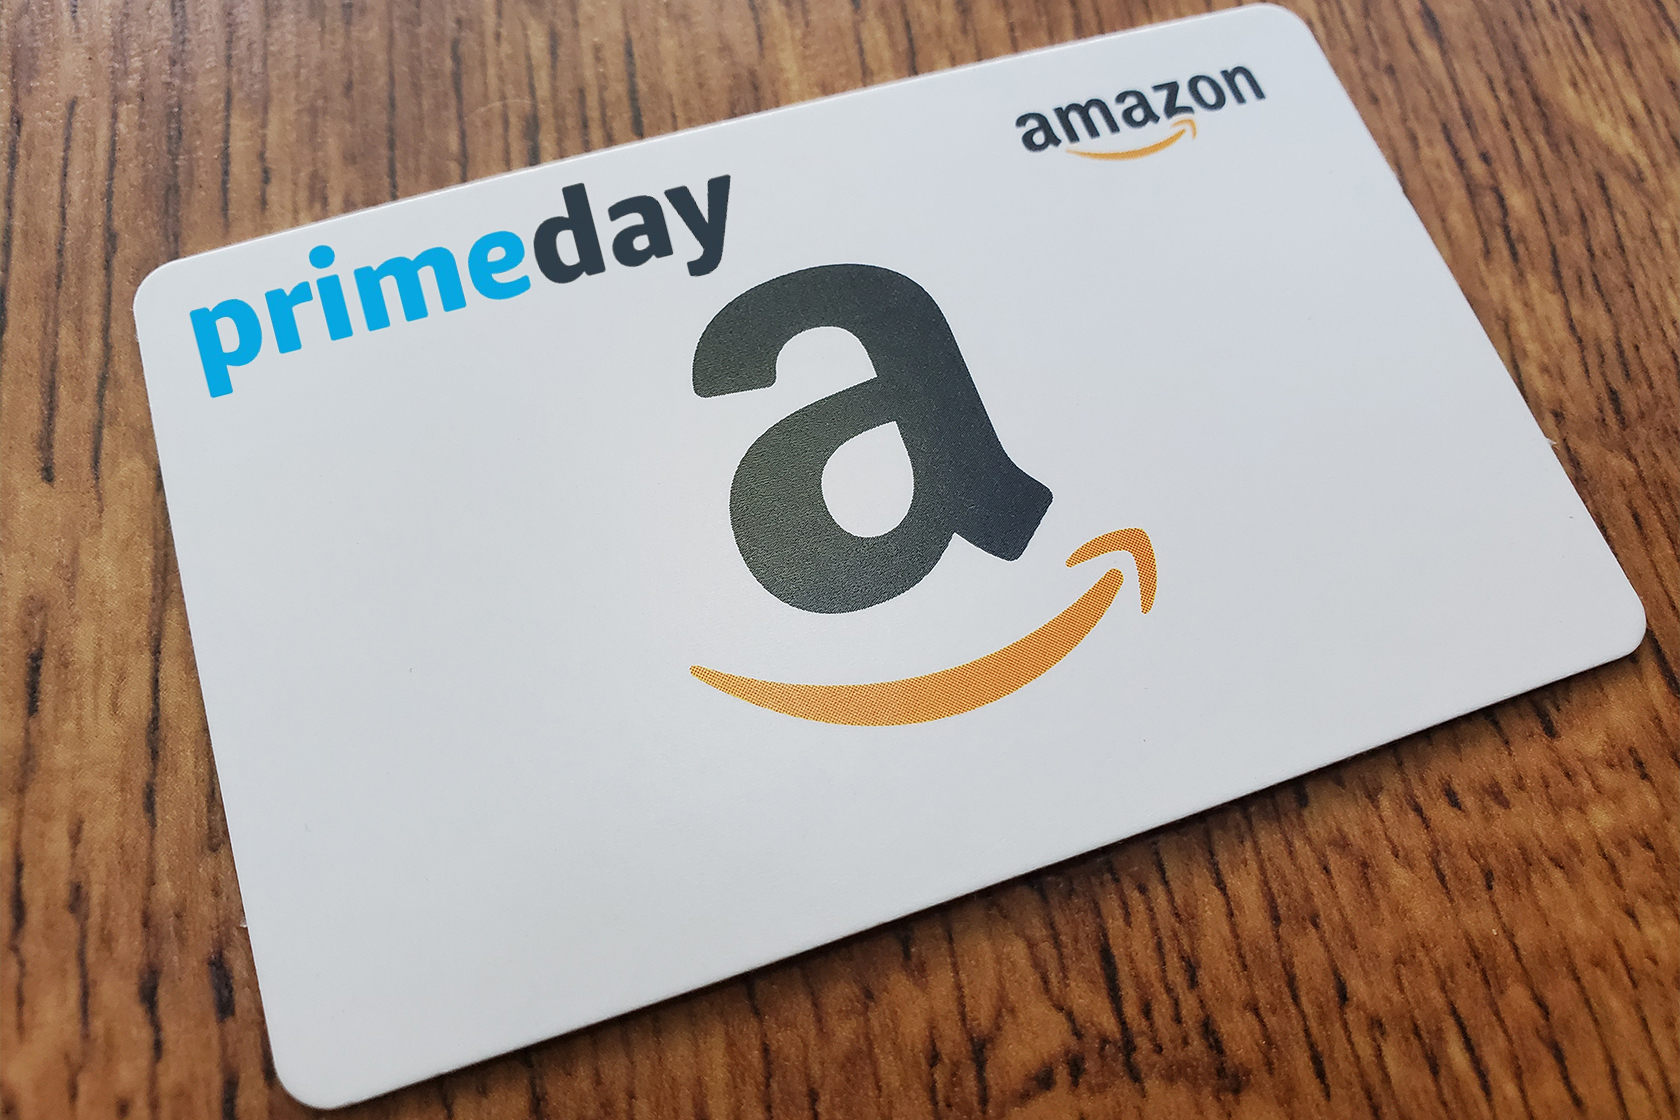 Updated Amazon Gift Card Rates In Naira Today - Dtunes